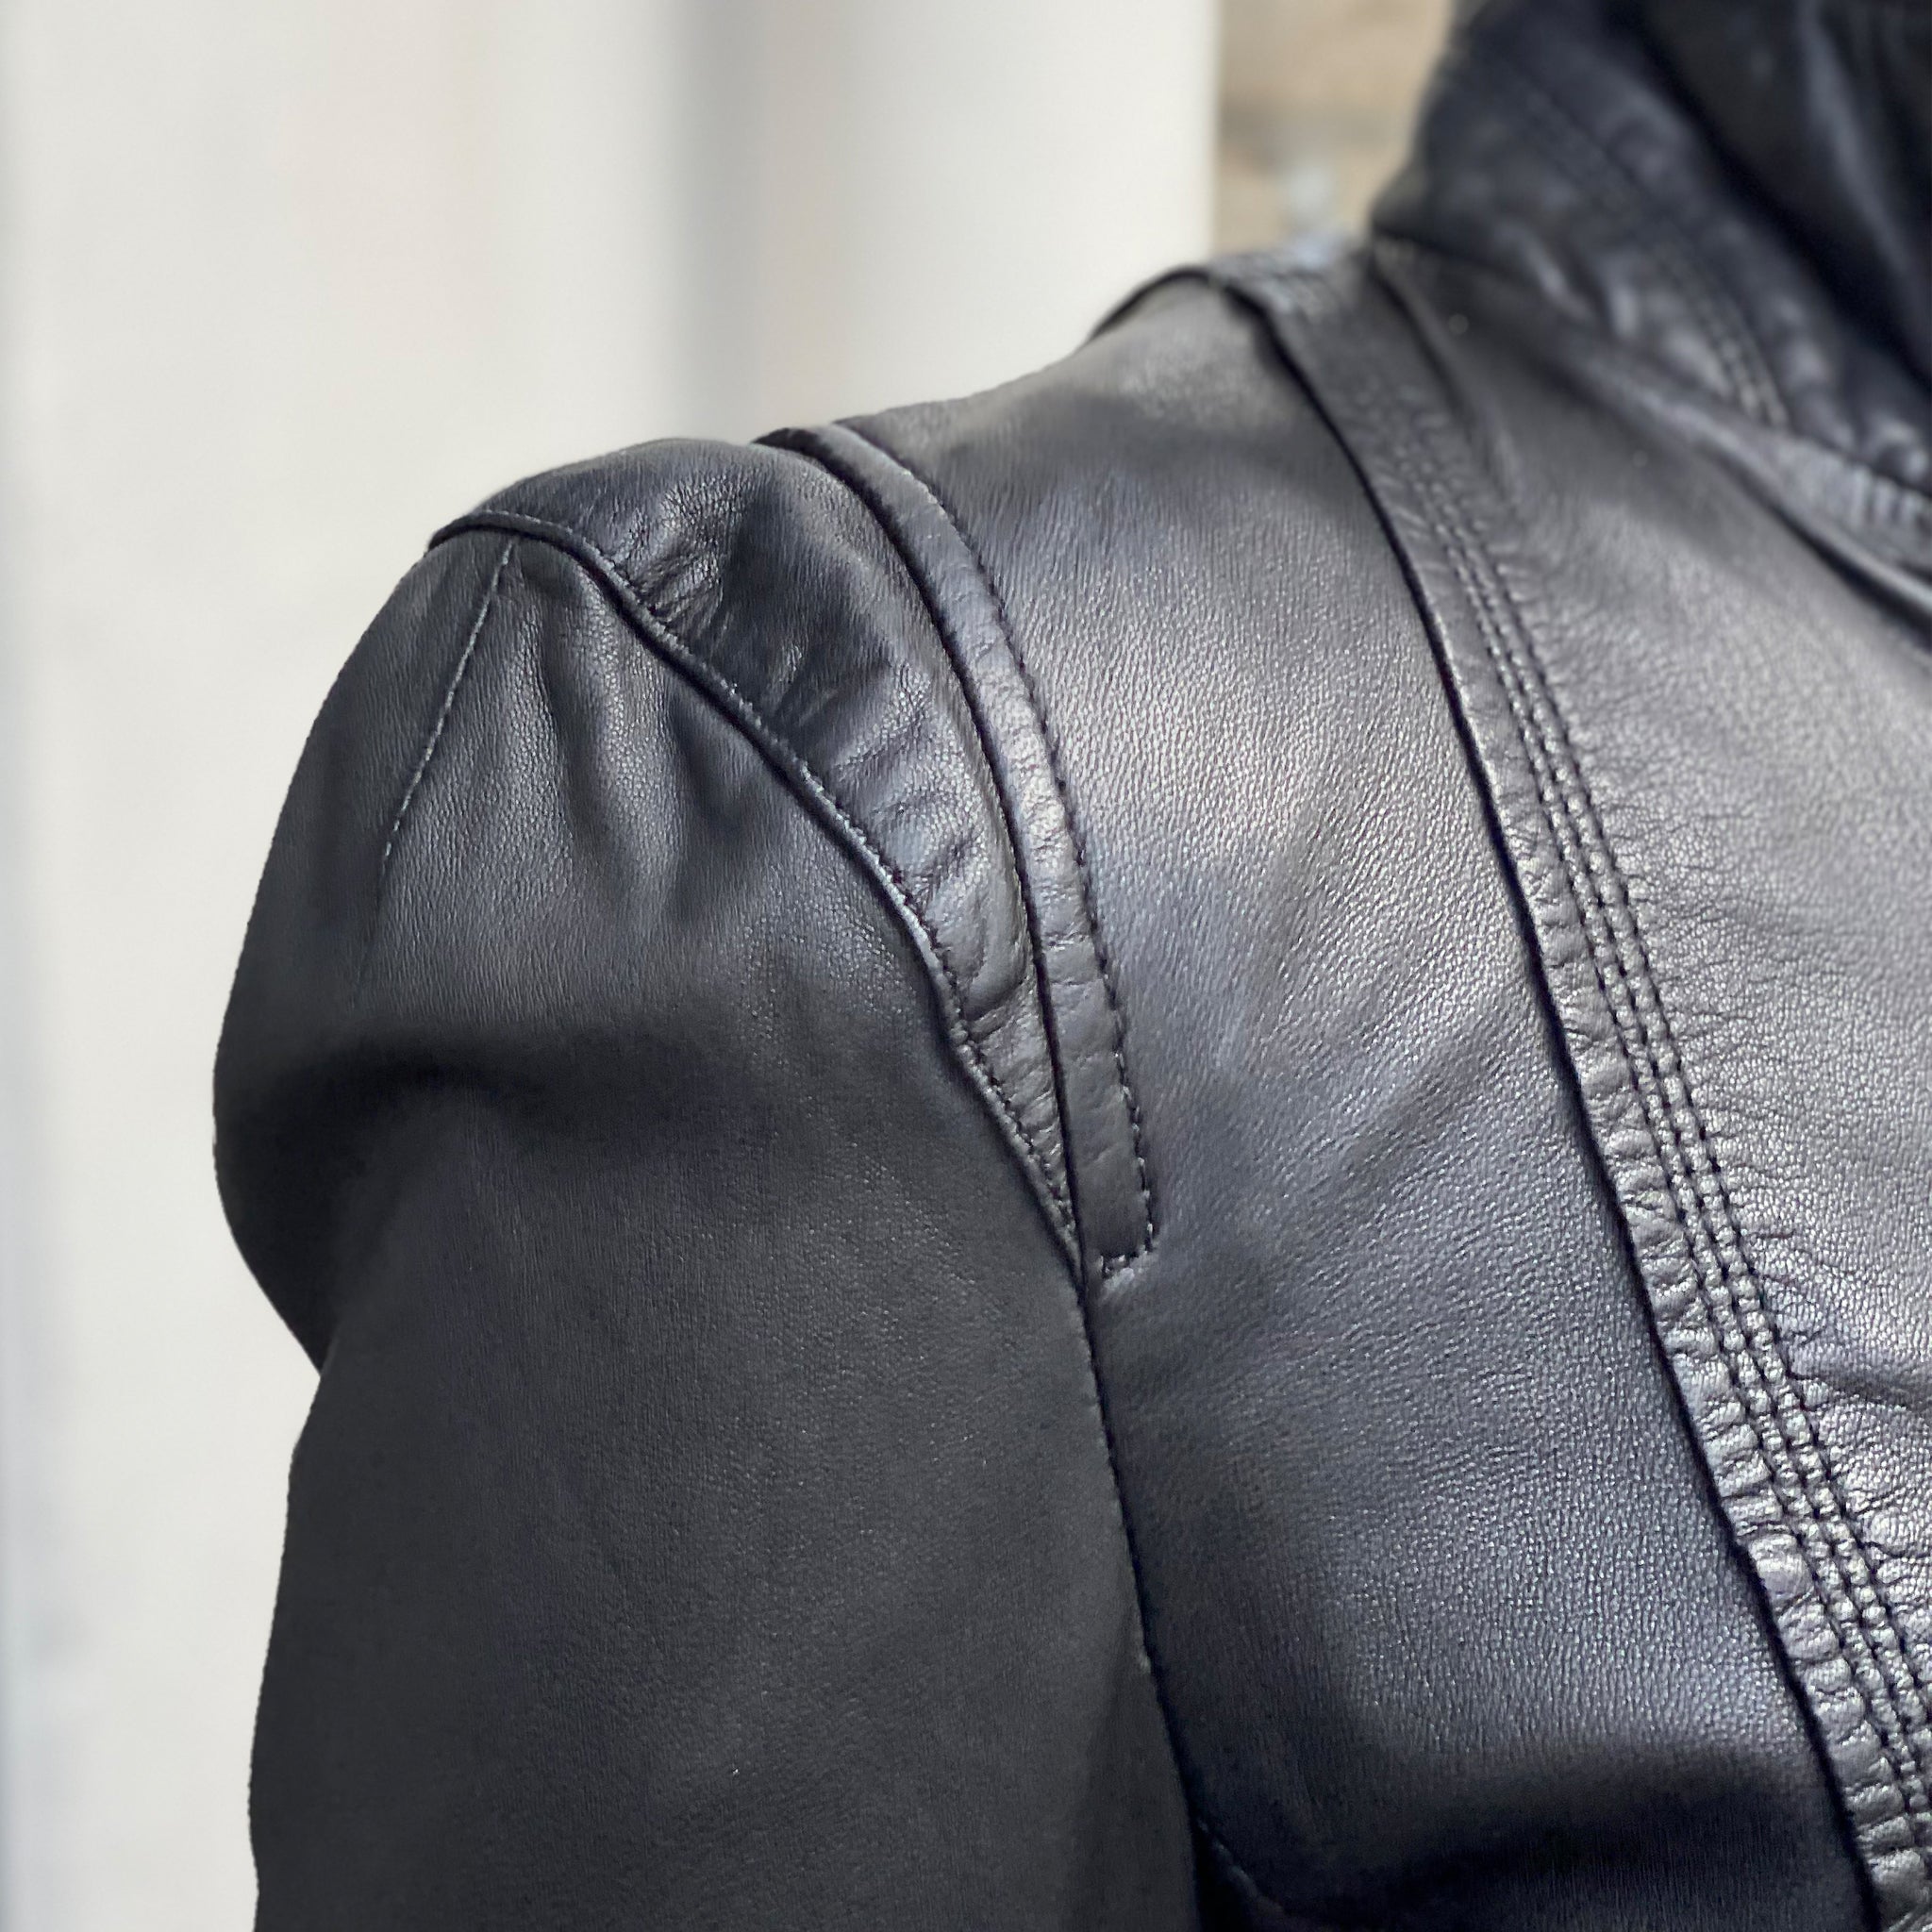 A close up of a woman wearing MDK's Leather Rucy Jacket - Black.